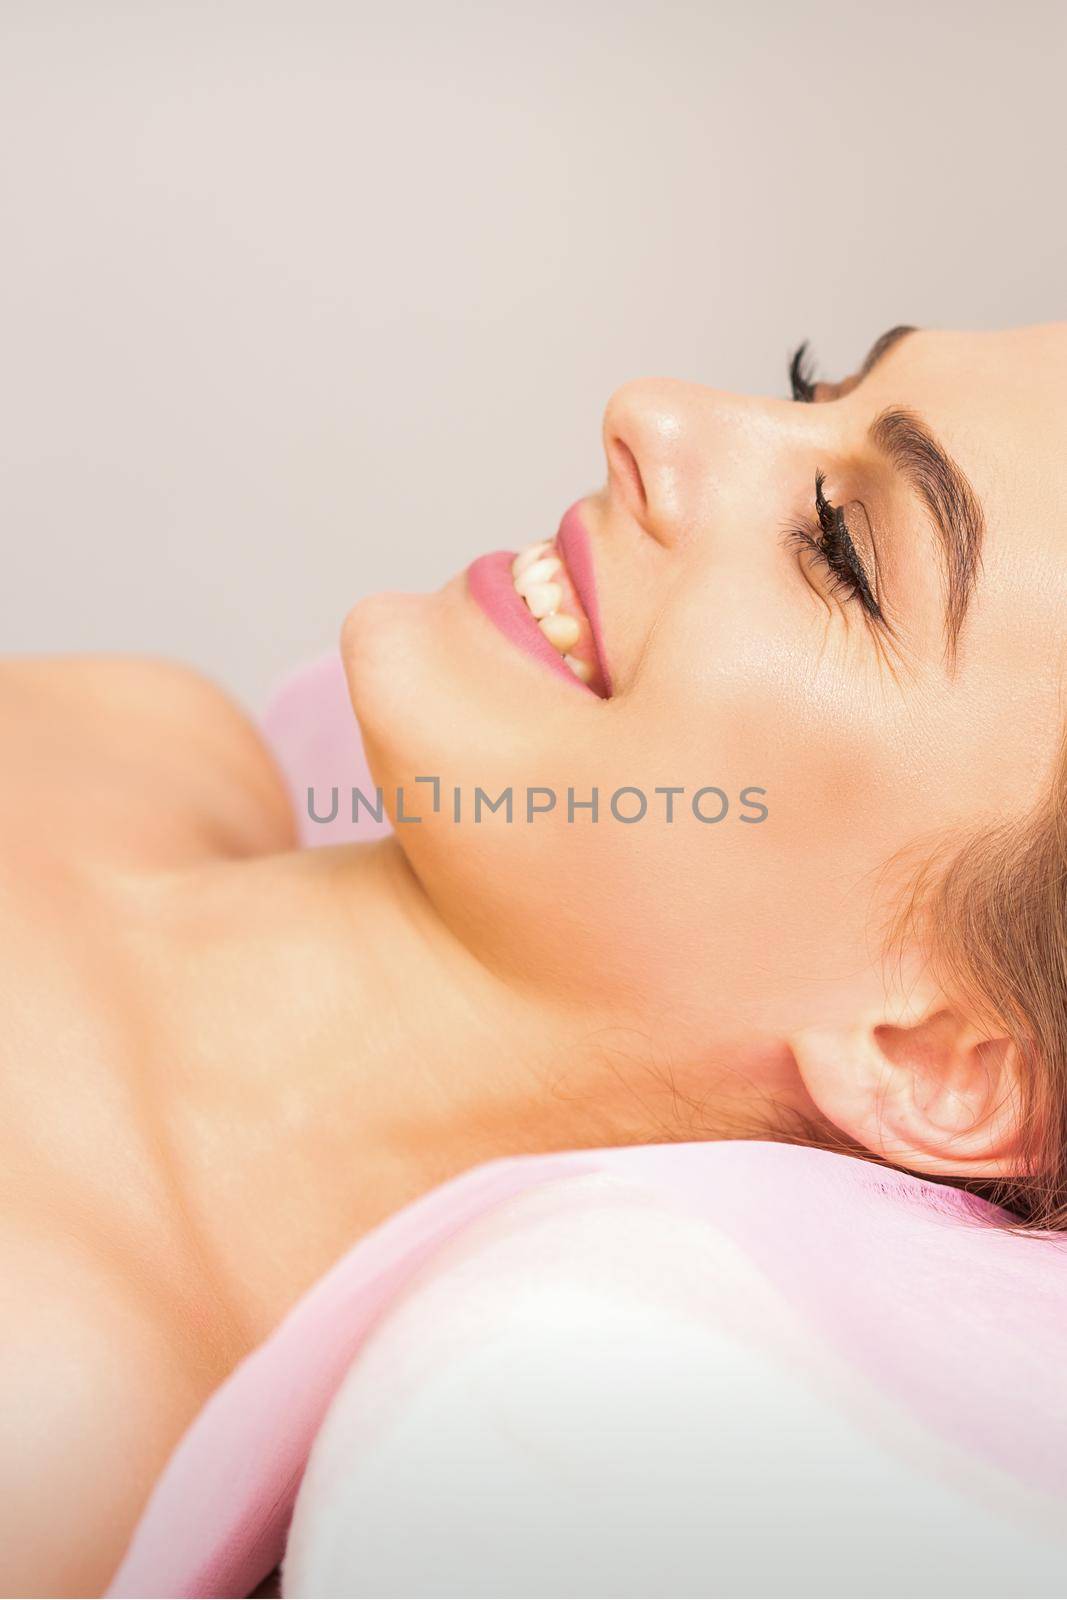 A beautiful smiling young woman is lying on a massage couch waiting for a massage in a massage room